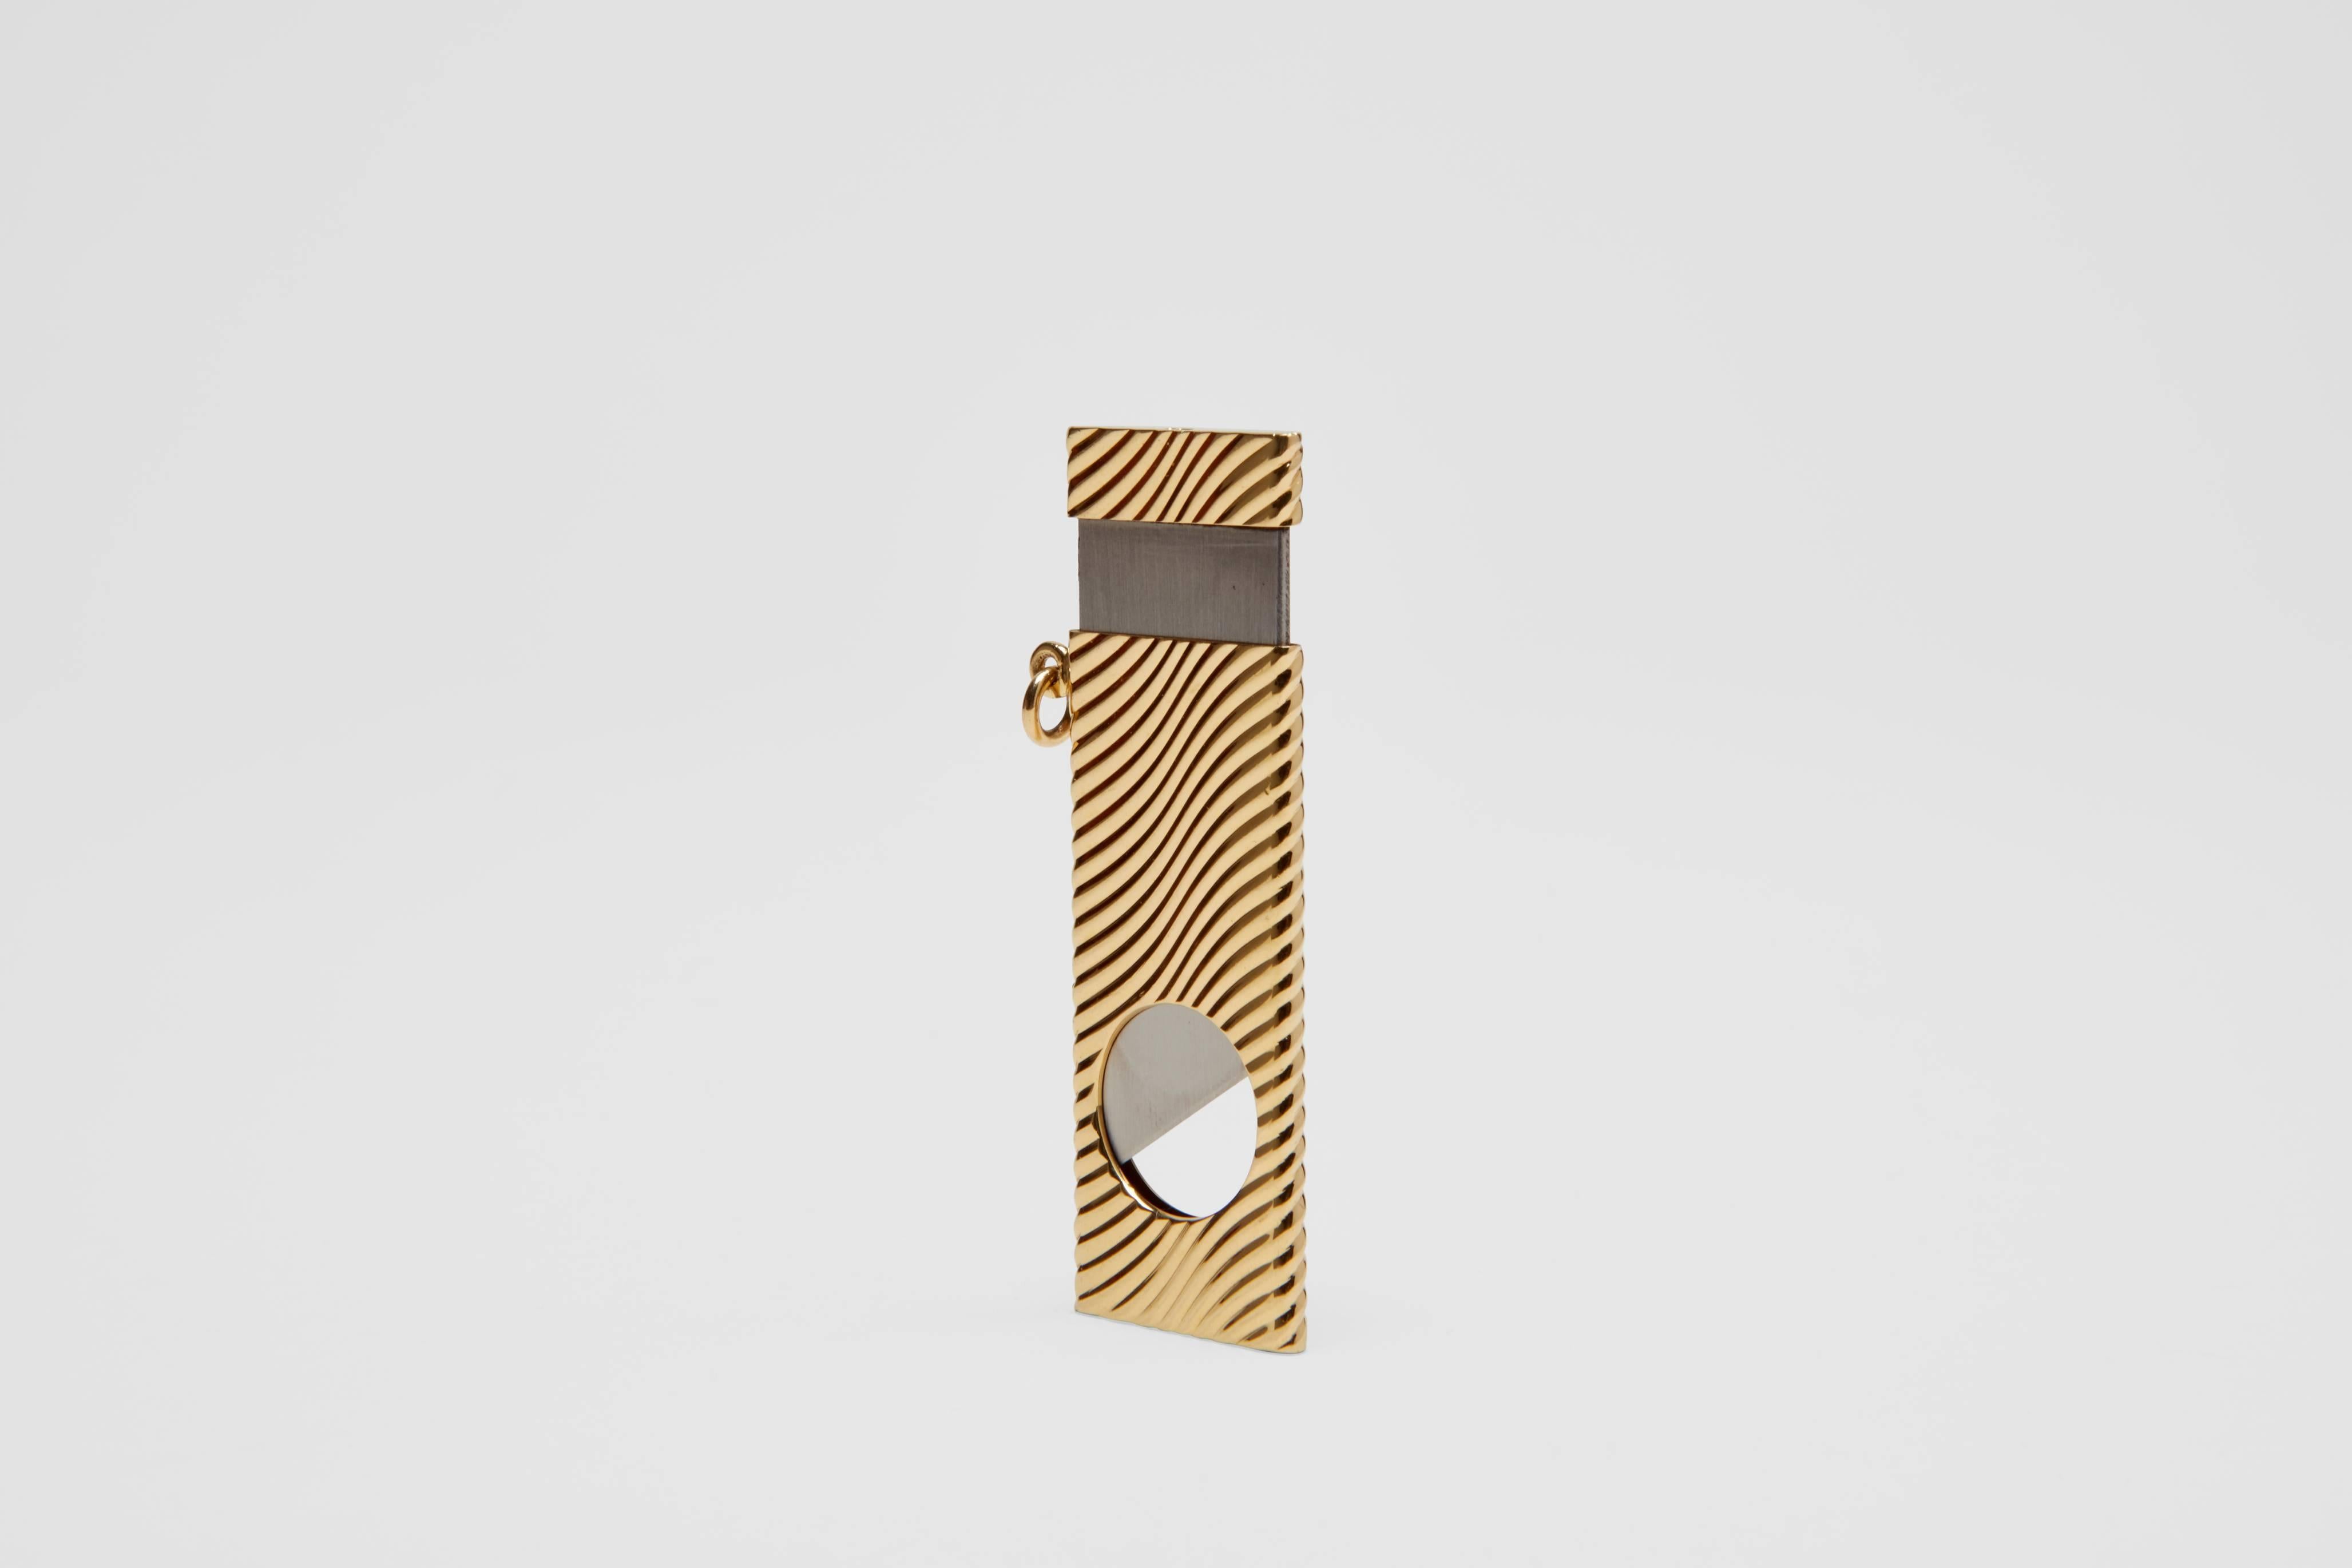 A solid 18-carat gold cigar cutter with stainless steel blade. This exceptional pocket, or travel, cigar cutter is certainly one the finest examples of a cigar cutter to have been made. This very eye catching wavy, ribbed design was produced by the